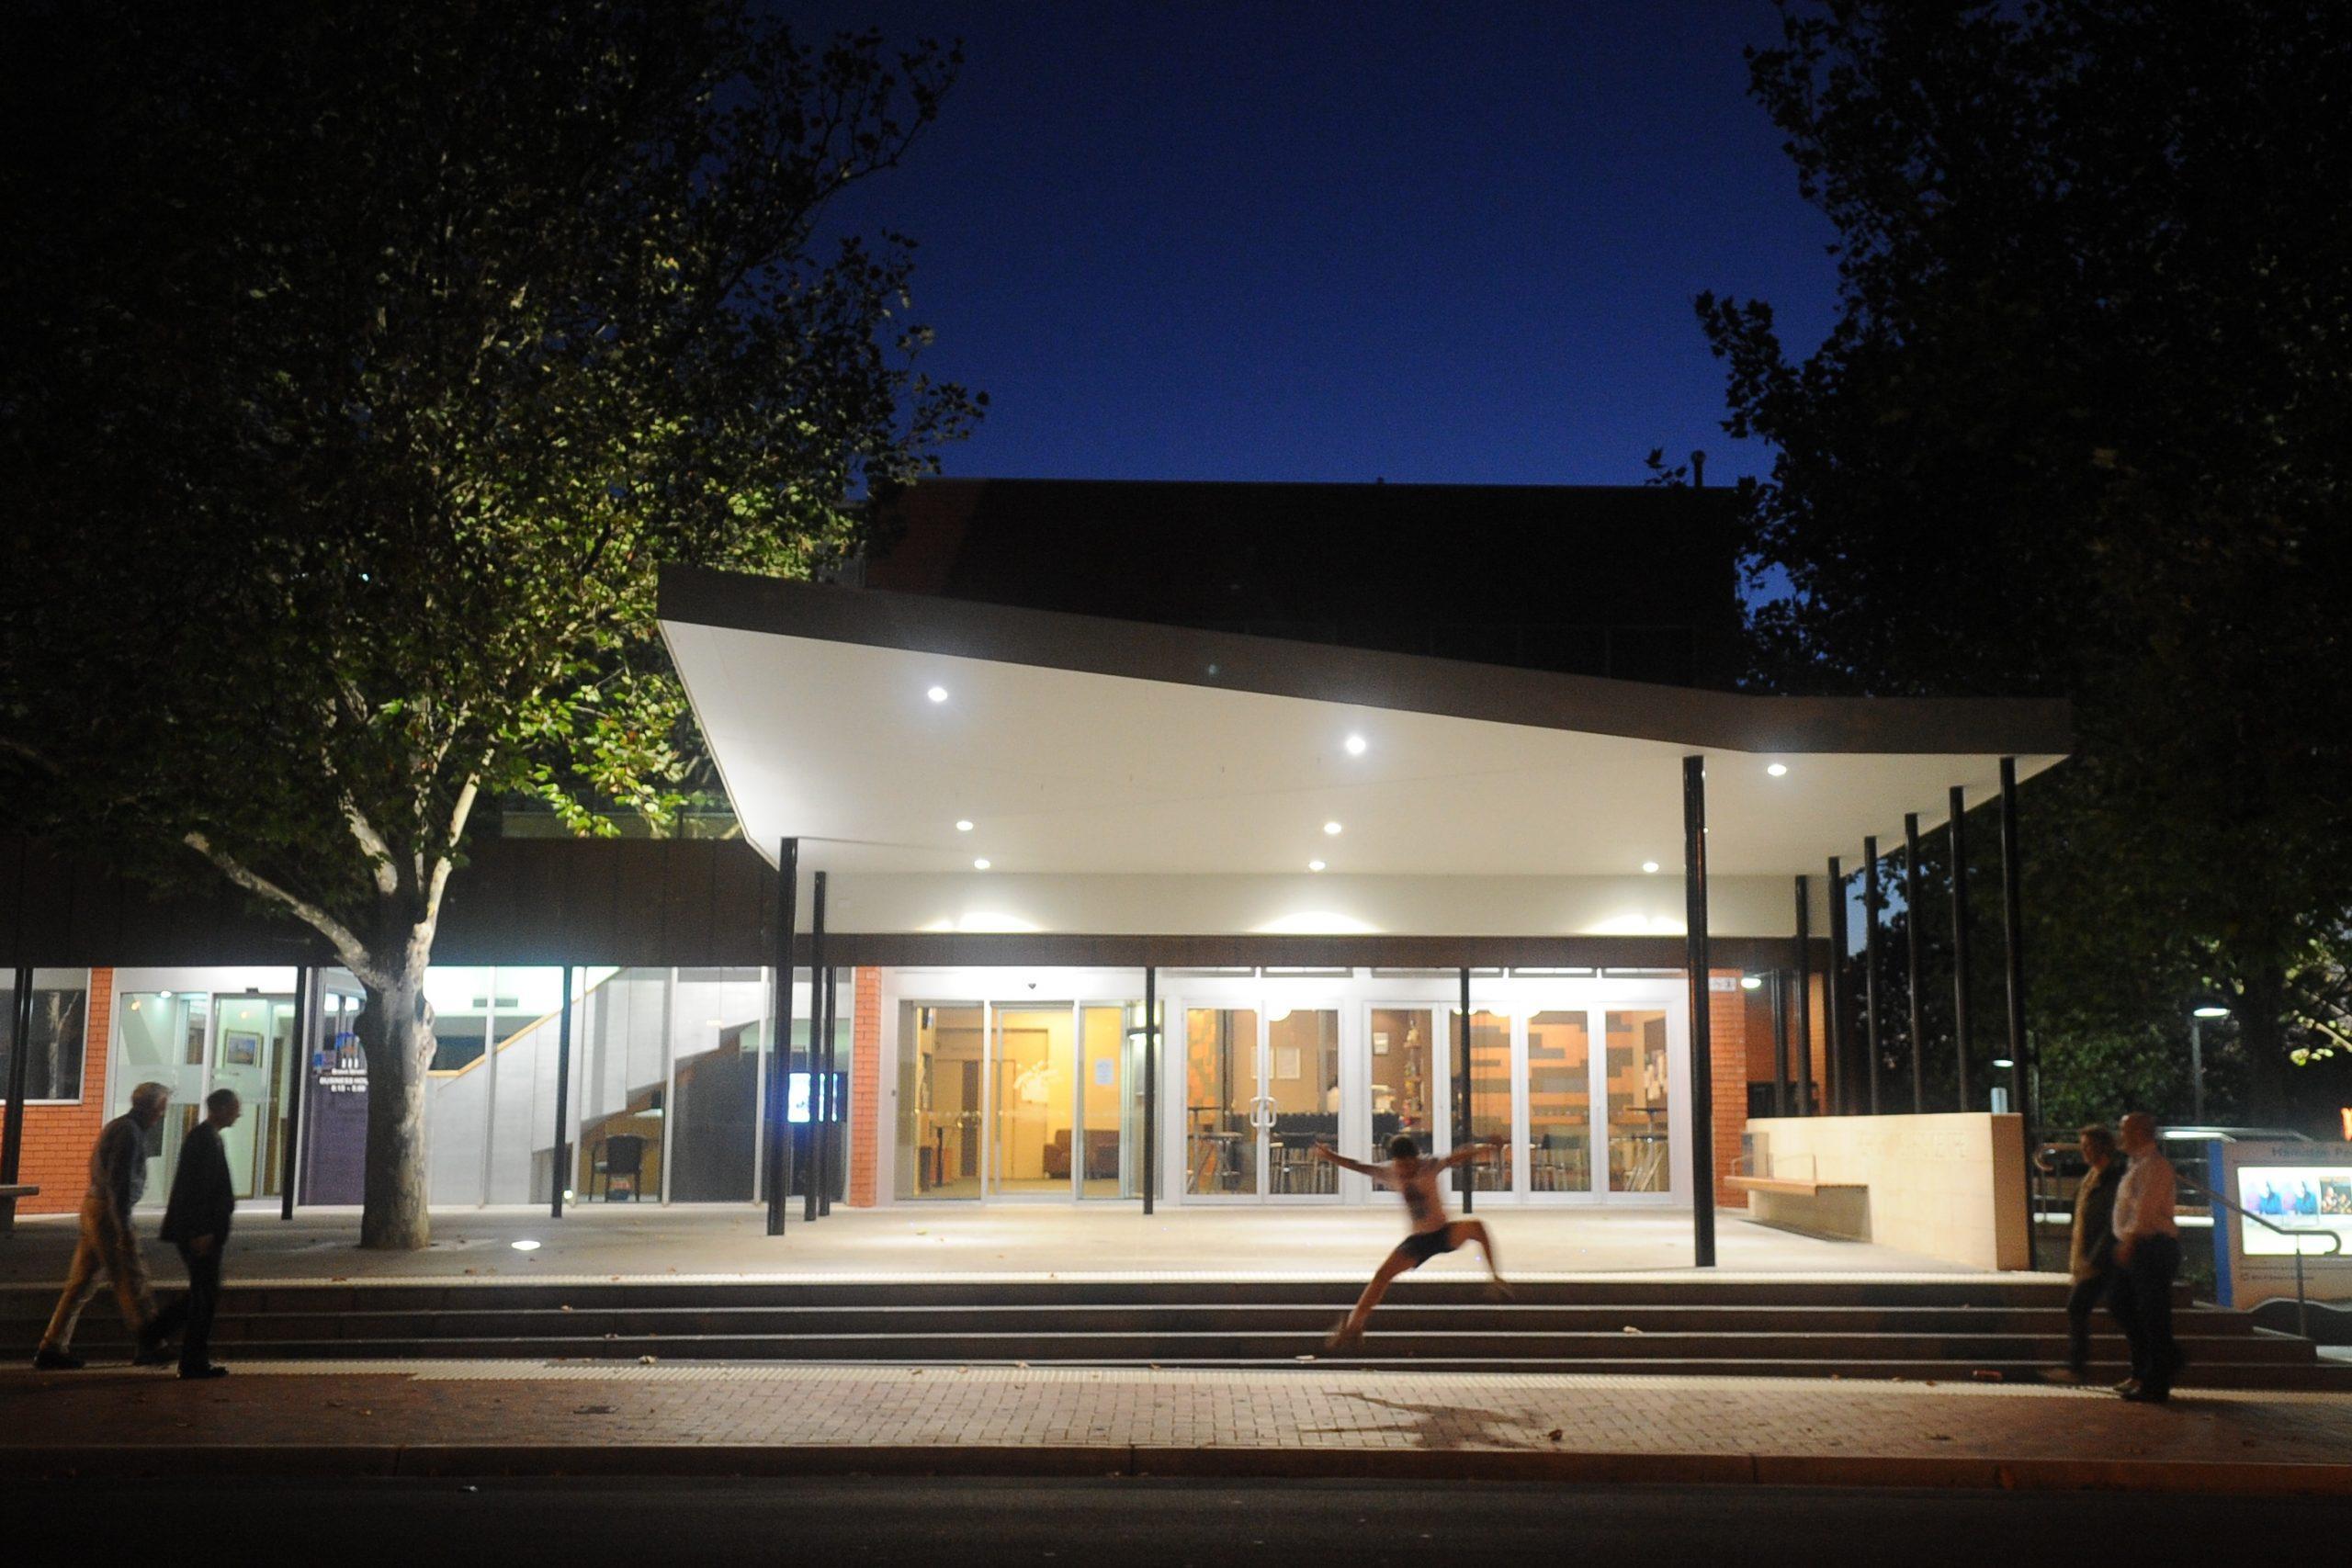 HPAC facade at twilight with dancing figure - square